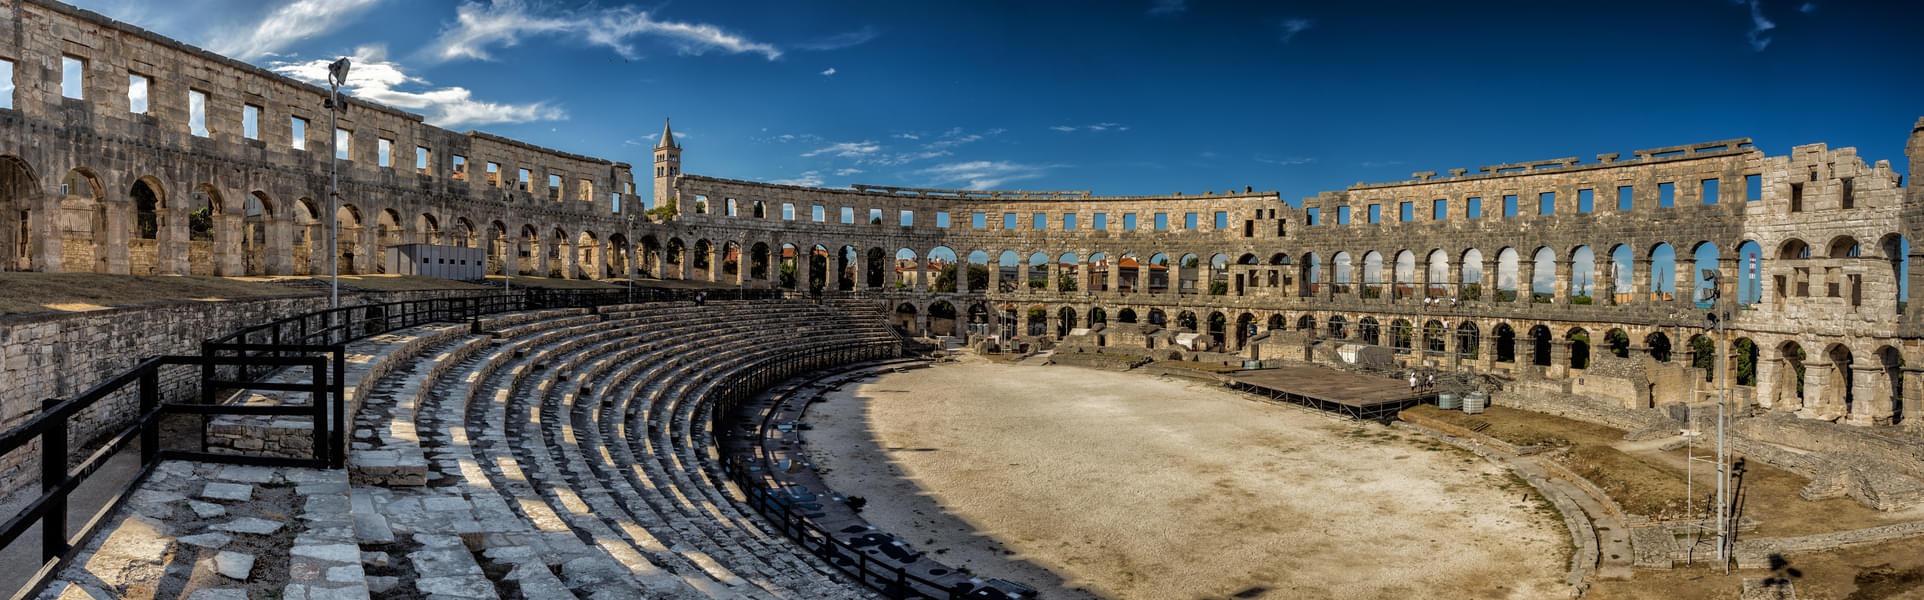 Colosseum Tickets with Gladiator Arena Access Image